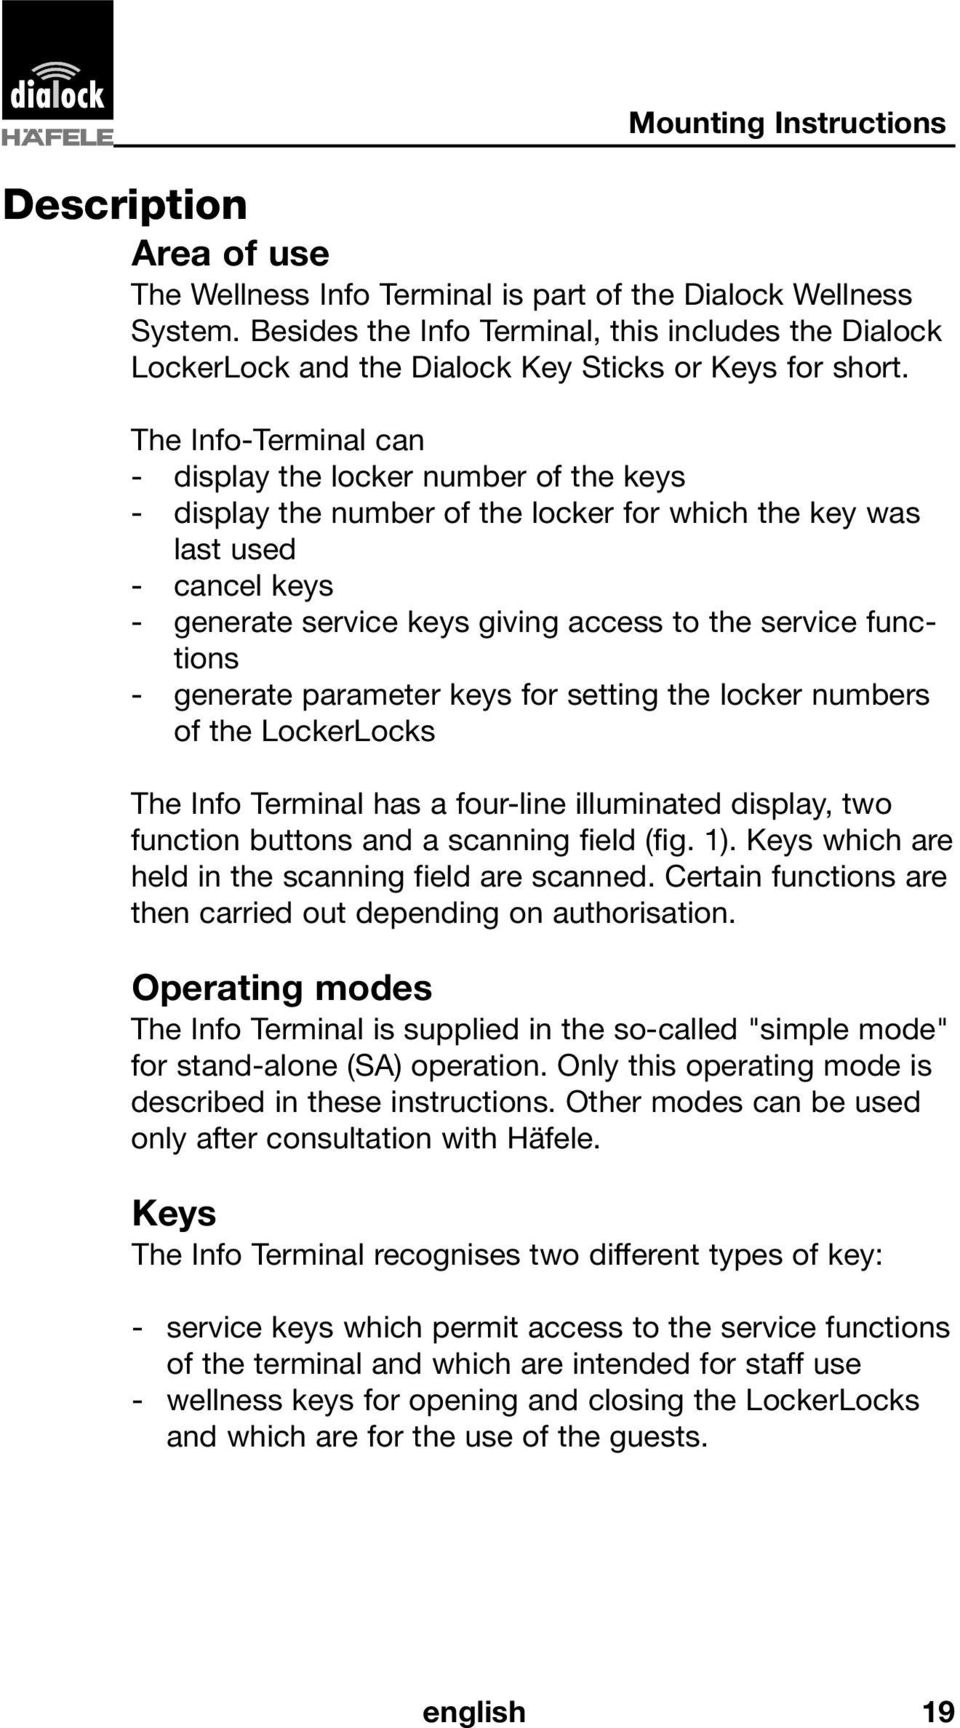 The Info-Terminal can - display the locker number of the keys - display the number of the locker for which the key was last used - cancel keys - generate service keys giving access to the service